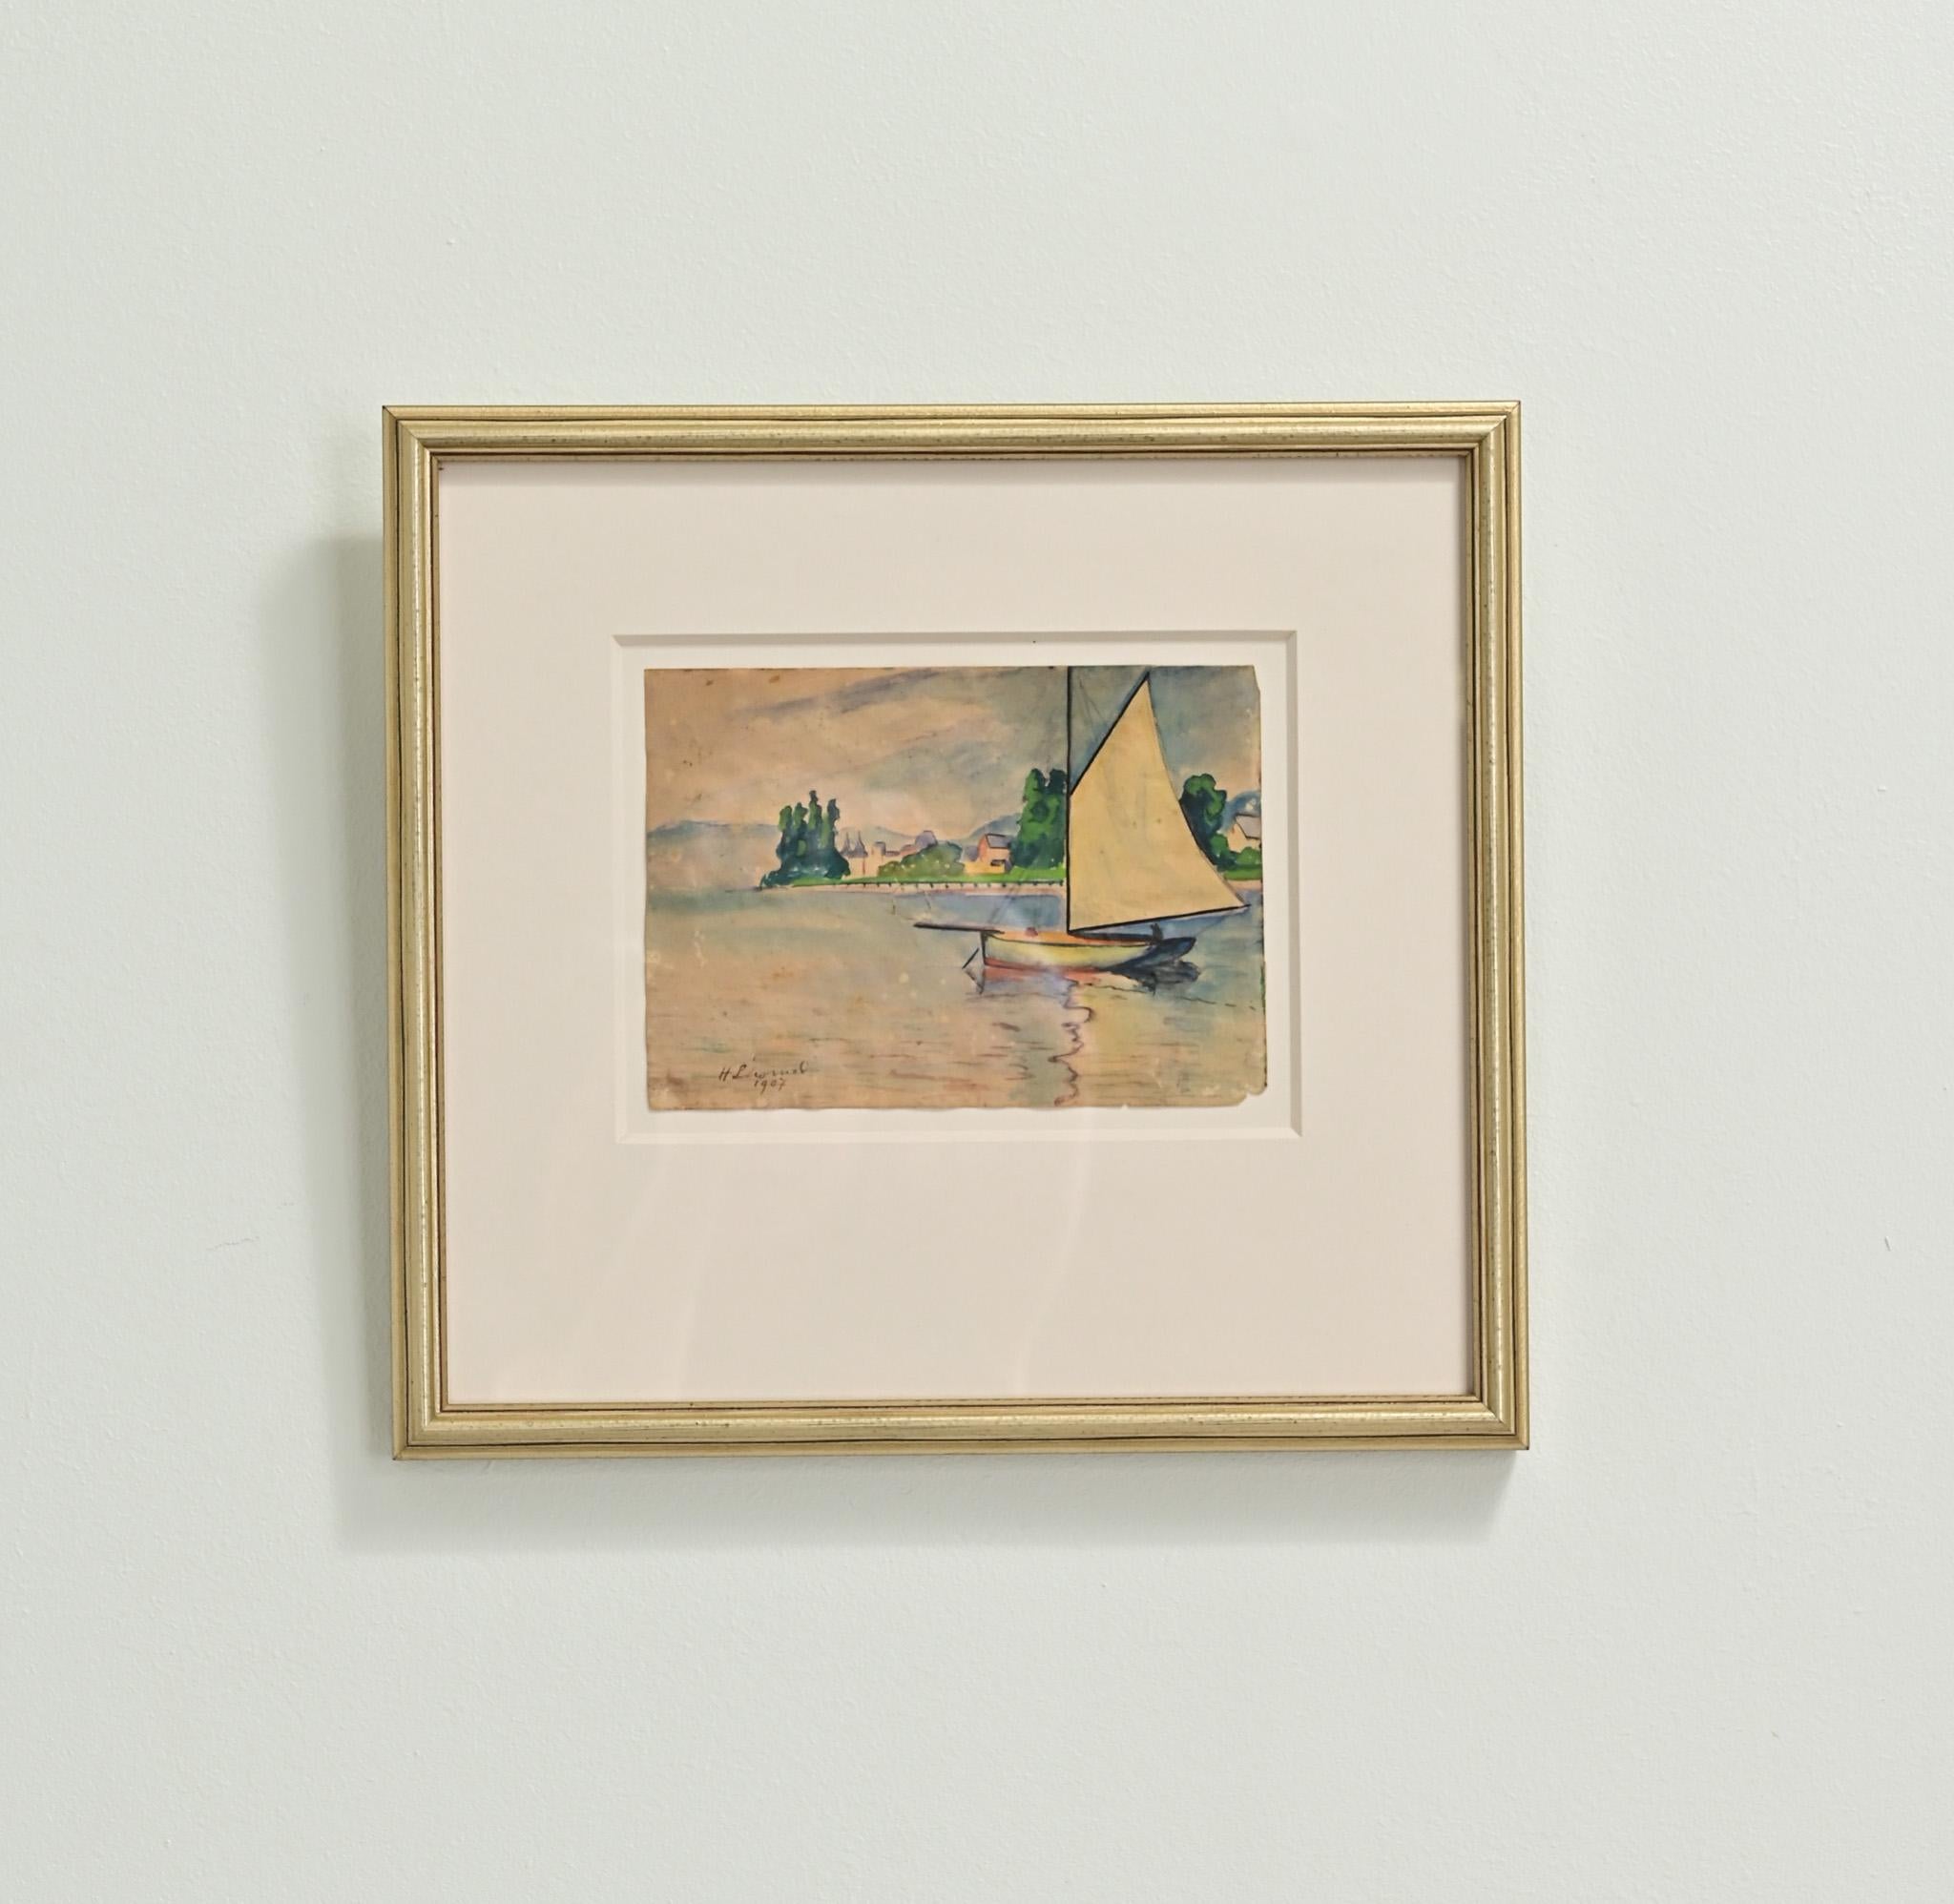 A petite French watercolor painting signed and dated by the artist. This is a painting of a sailboat on the shores of a town and is framed with a matboard and new gold gilt frame. Be sure to view the detailed images to see the current condition of